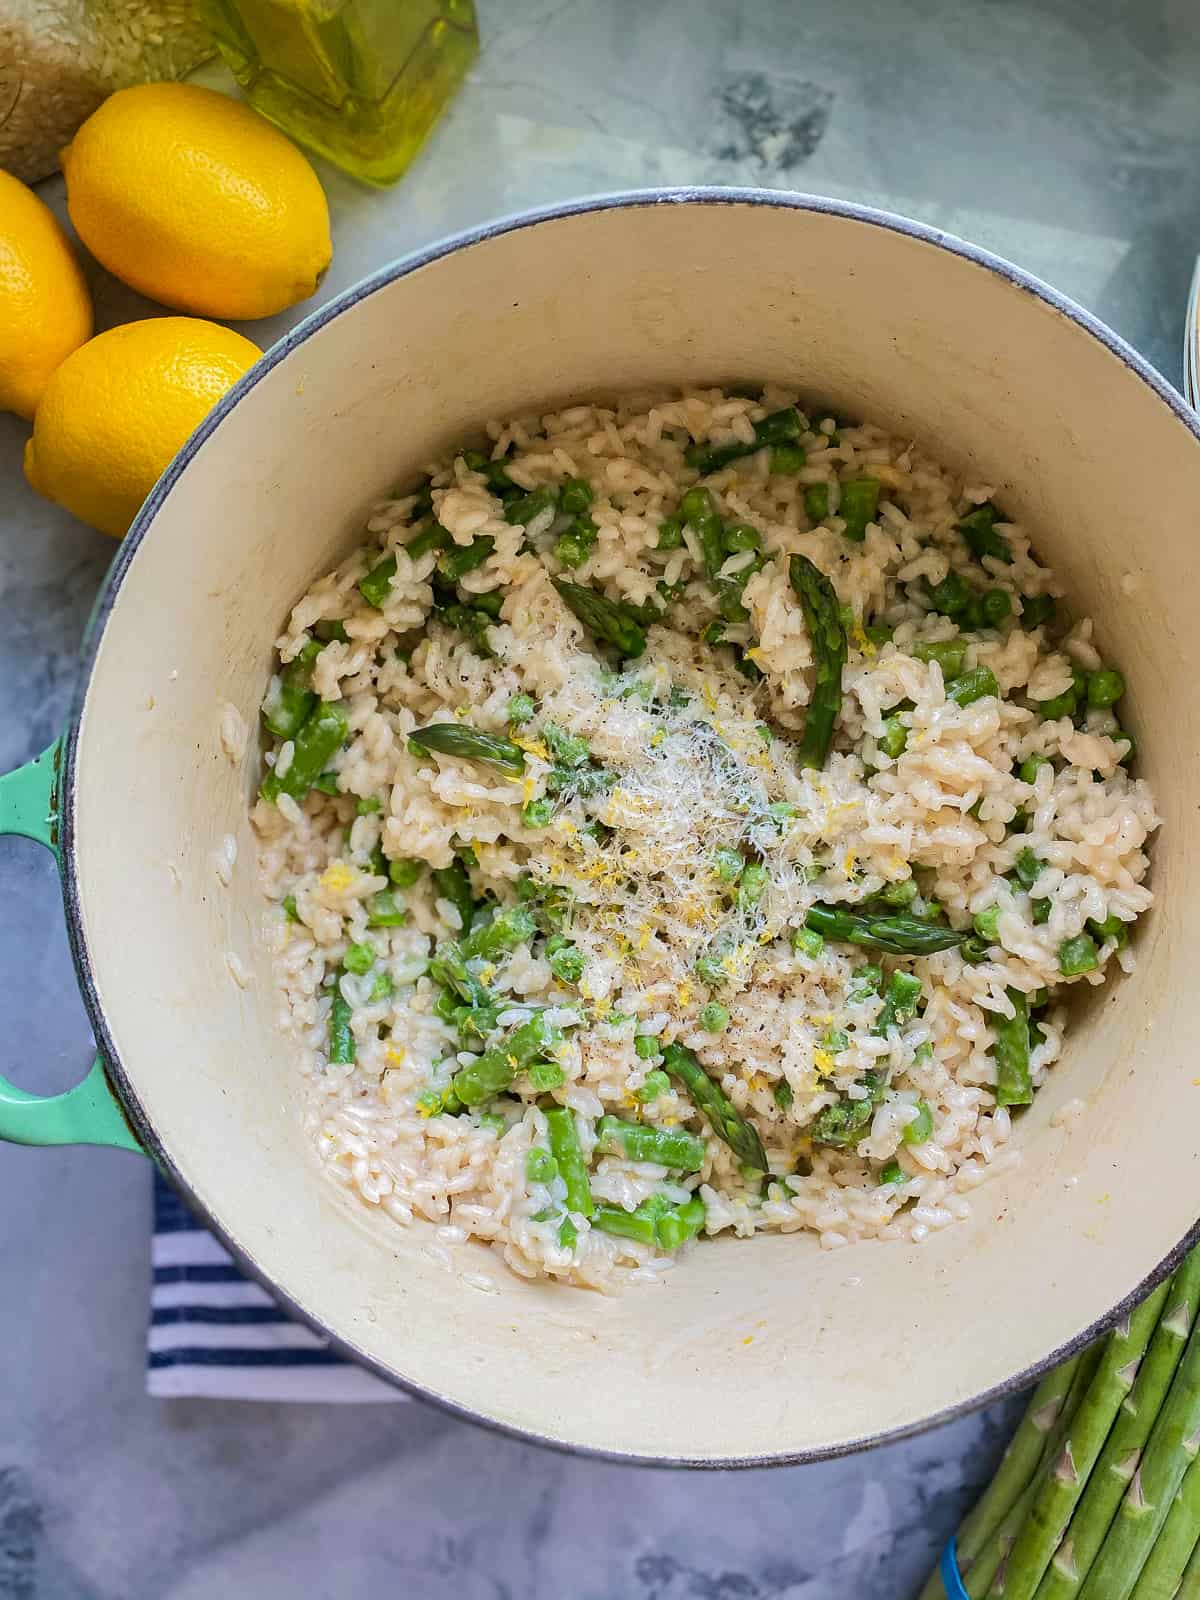 Green pot filled with rice, peas, asparagus, and cheese.